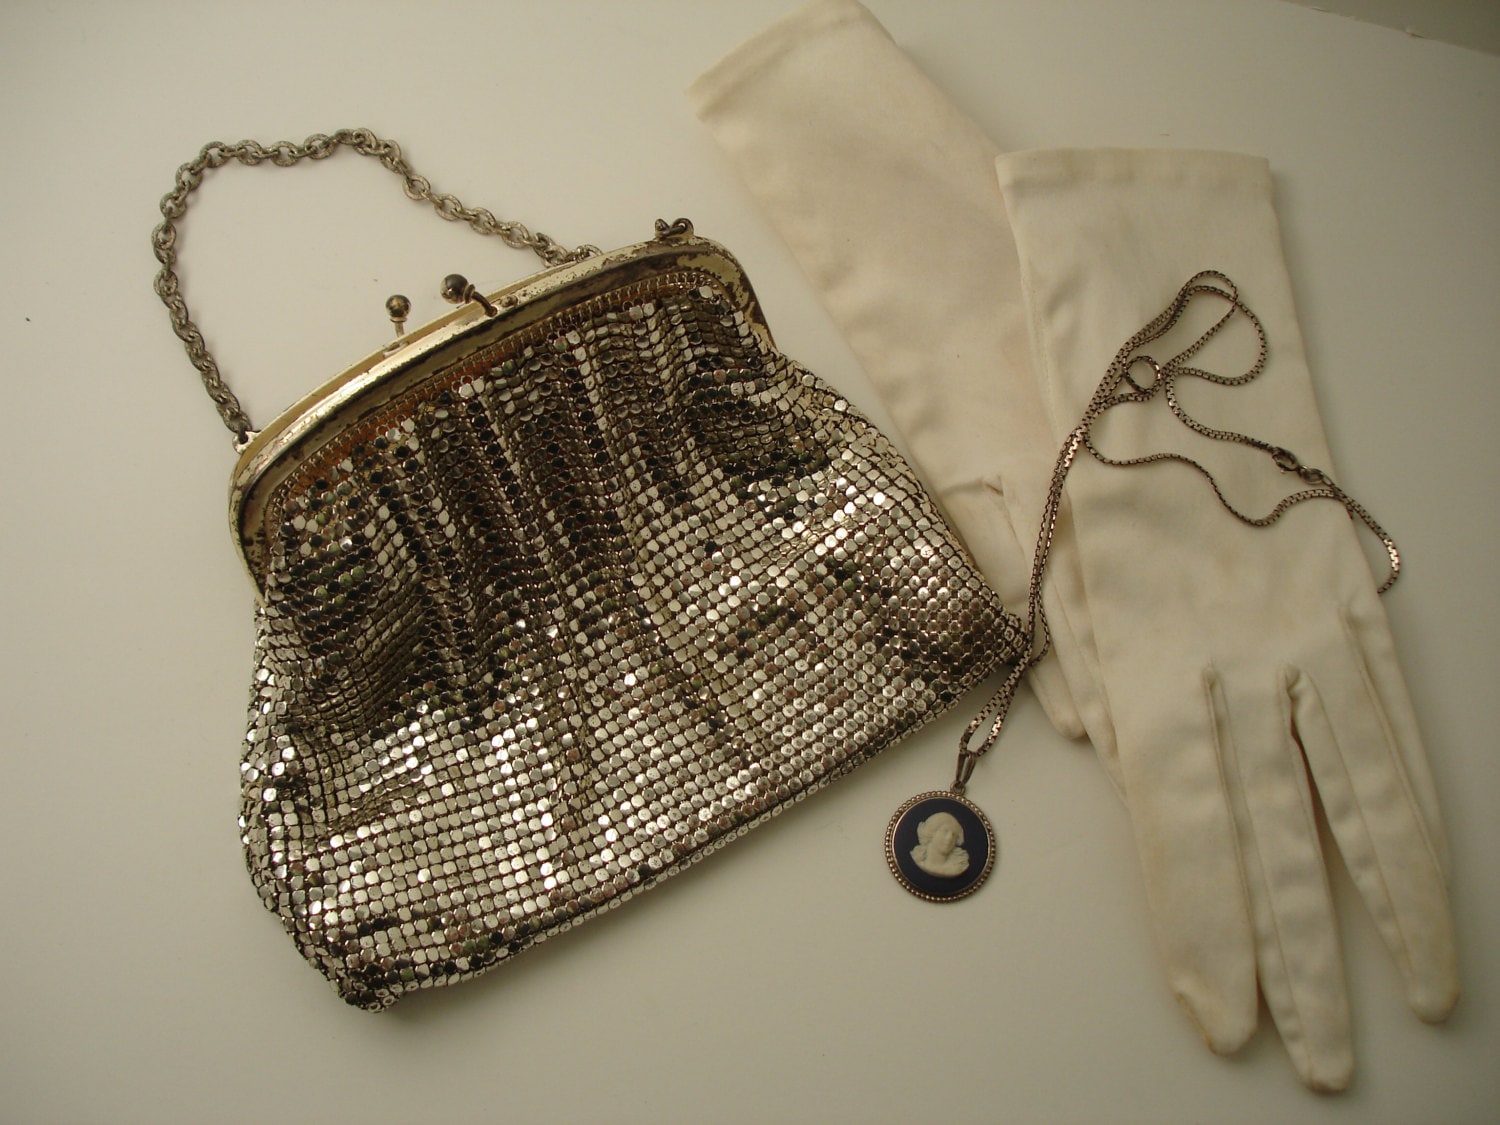 Antique Whiting and Davis Silver Mesh Bag by TheTealDoor on Etsy